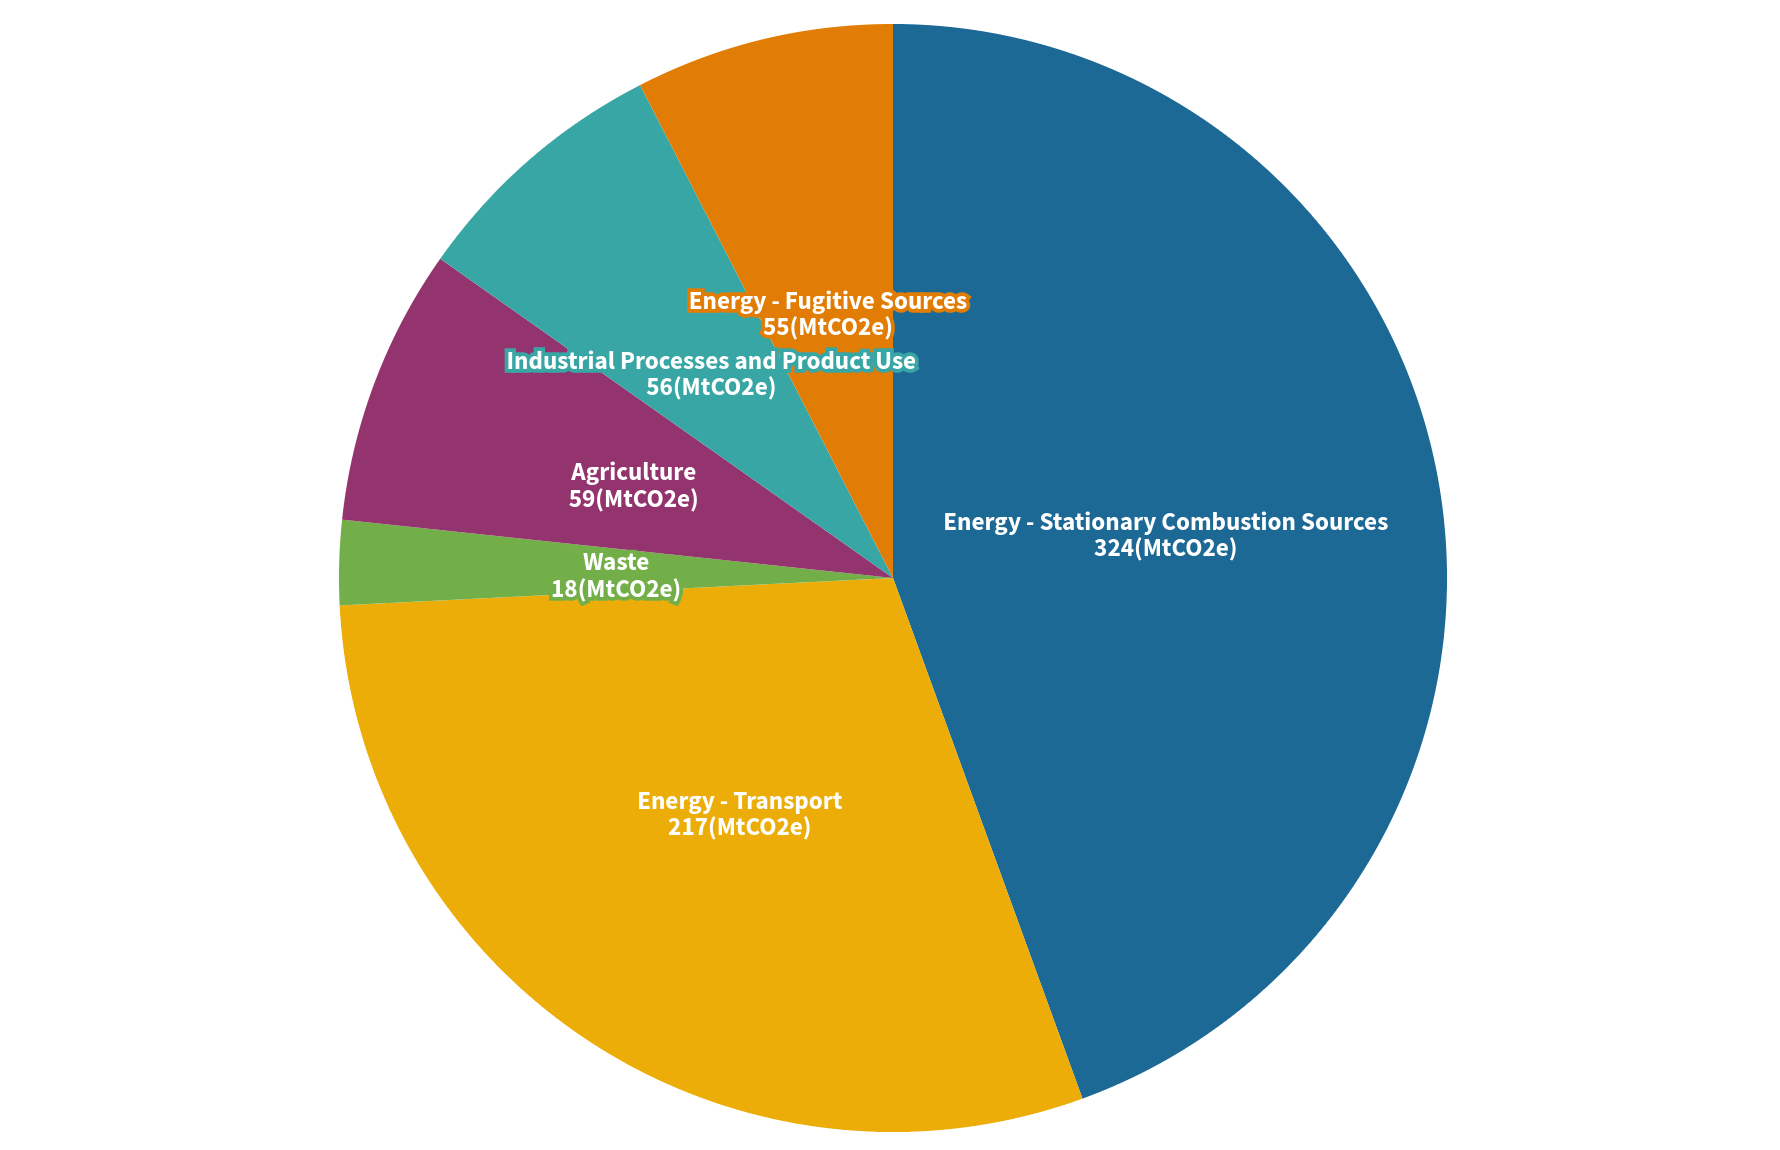 Pie chart of Canada’s emission by IPCC sector showing Stationary Combustion Sources and Transport as the two largest sector